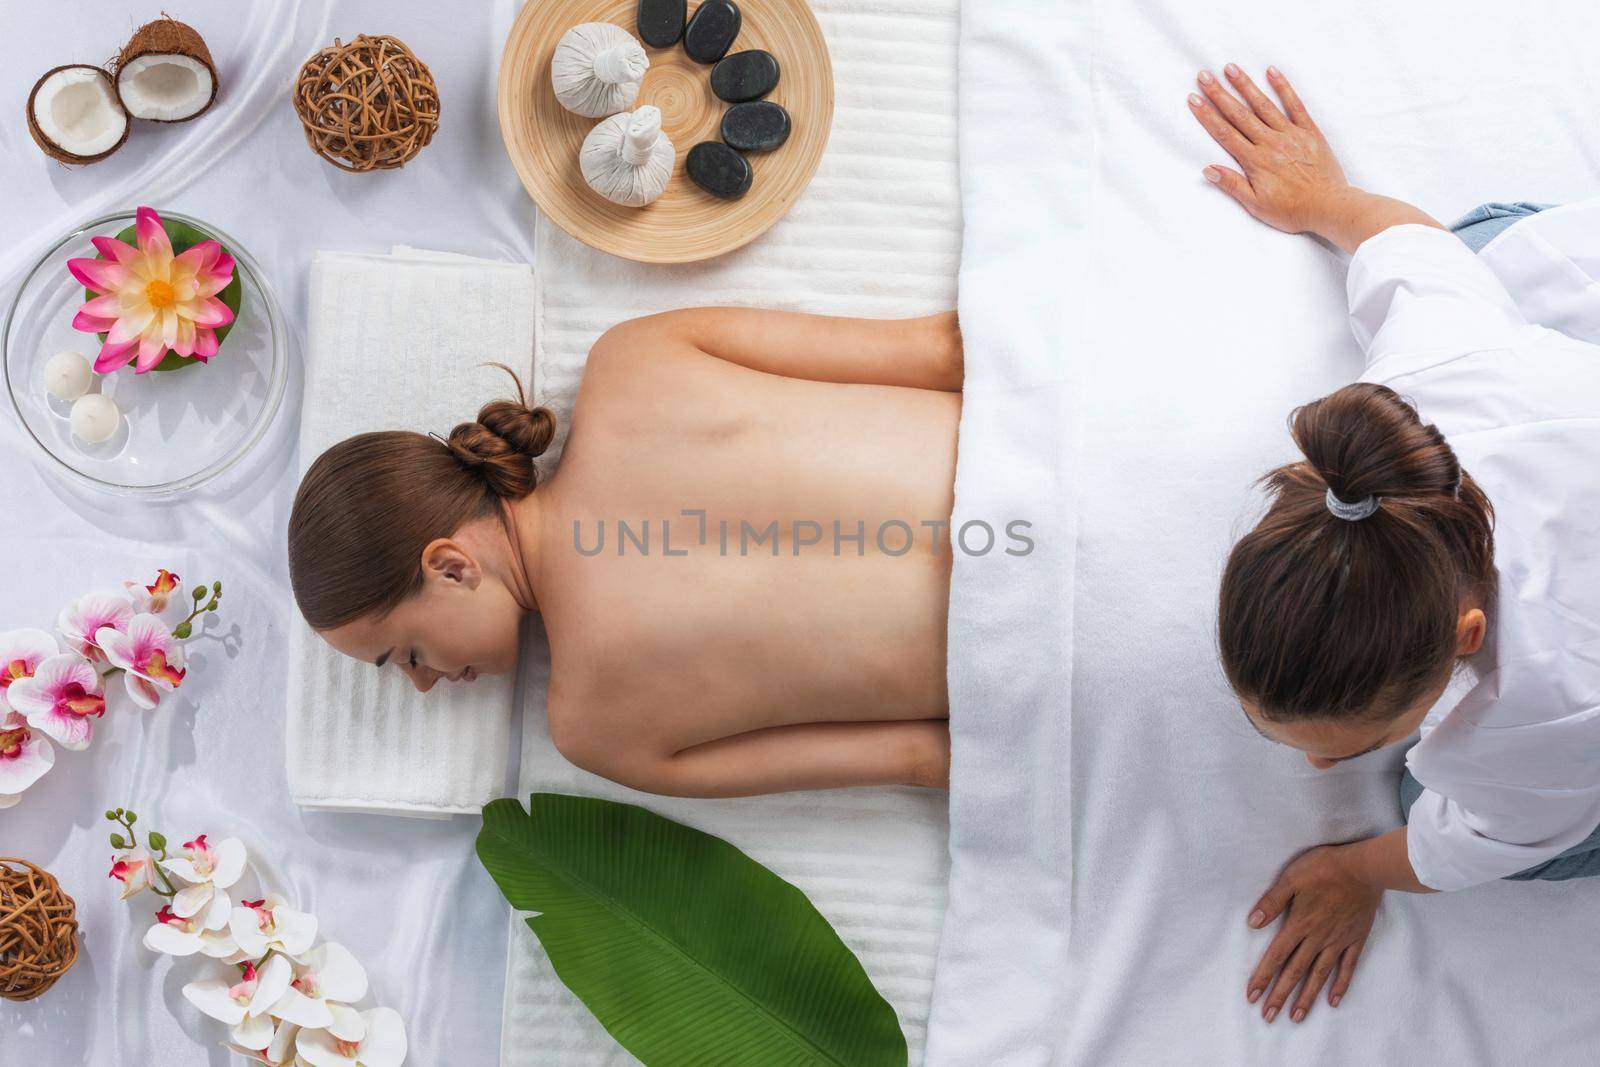 Woman at spa thai massage tow view, beauty treatments concept. Orchid and lotus flowers coconut stones and herb pouches